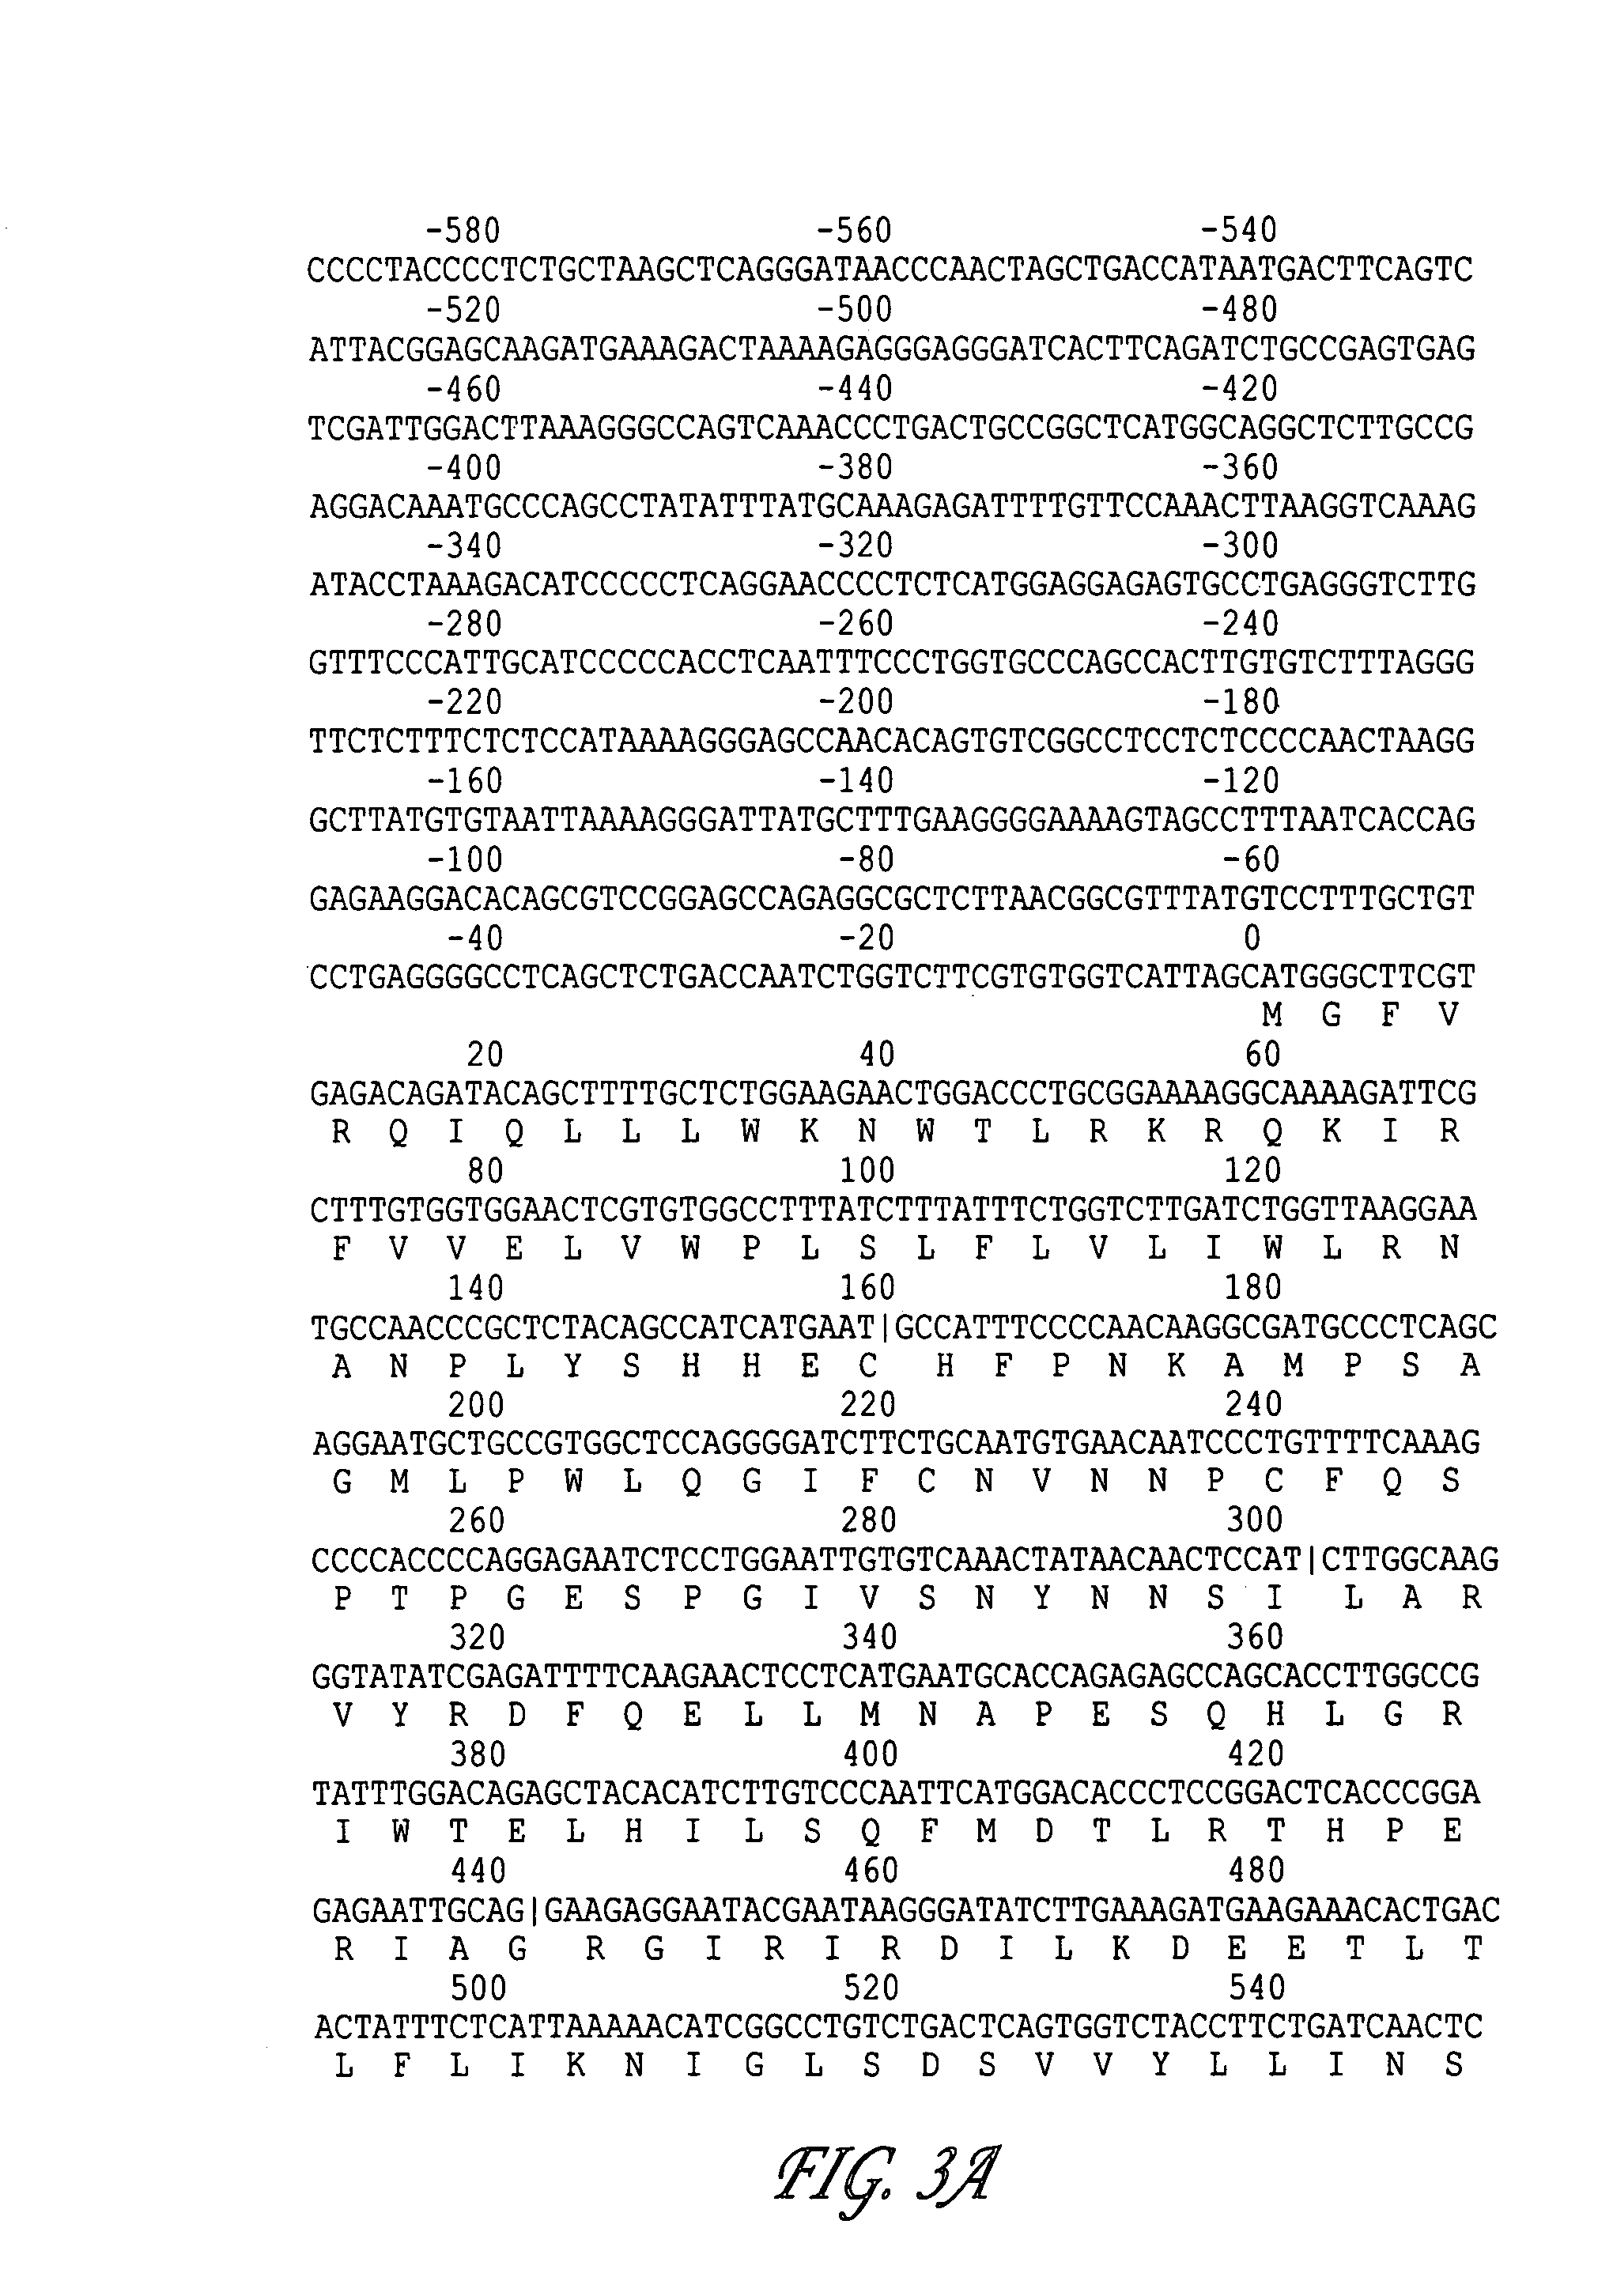 Nucleic acid and amino acid sequences for ATP-binding cassette transporter and methods of screening for agents that modify ATP-binding cassette transporter